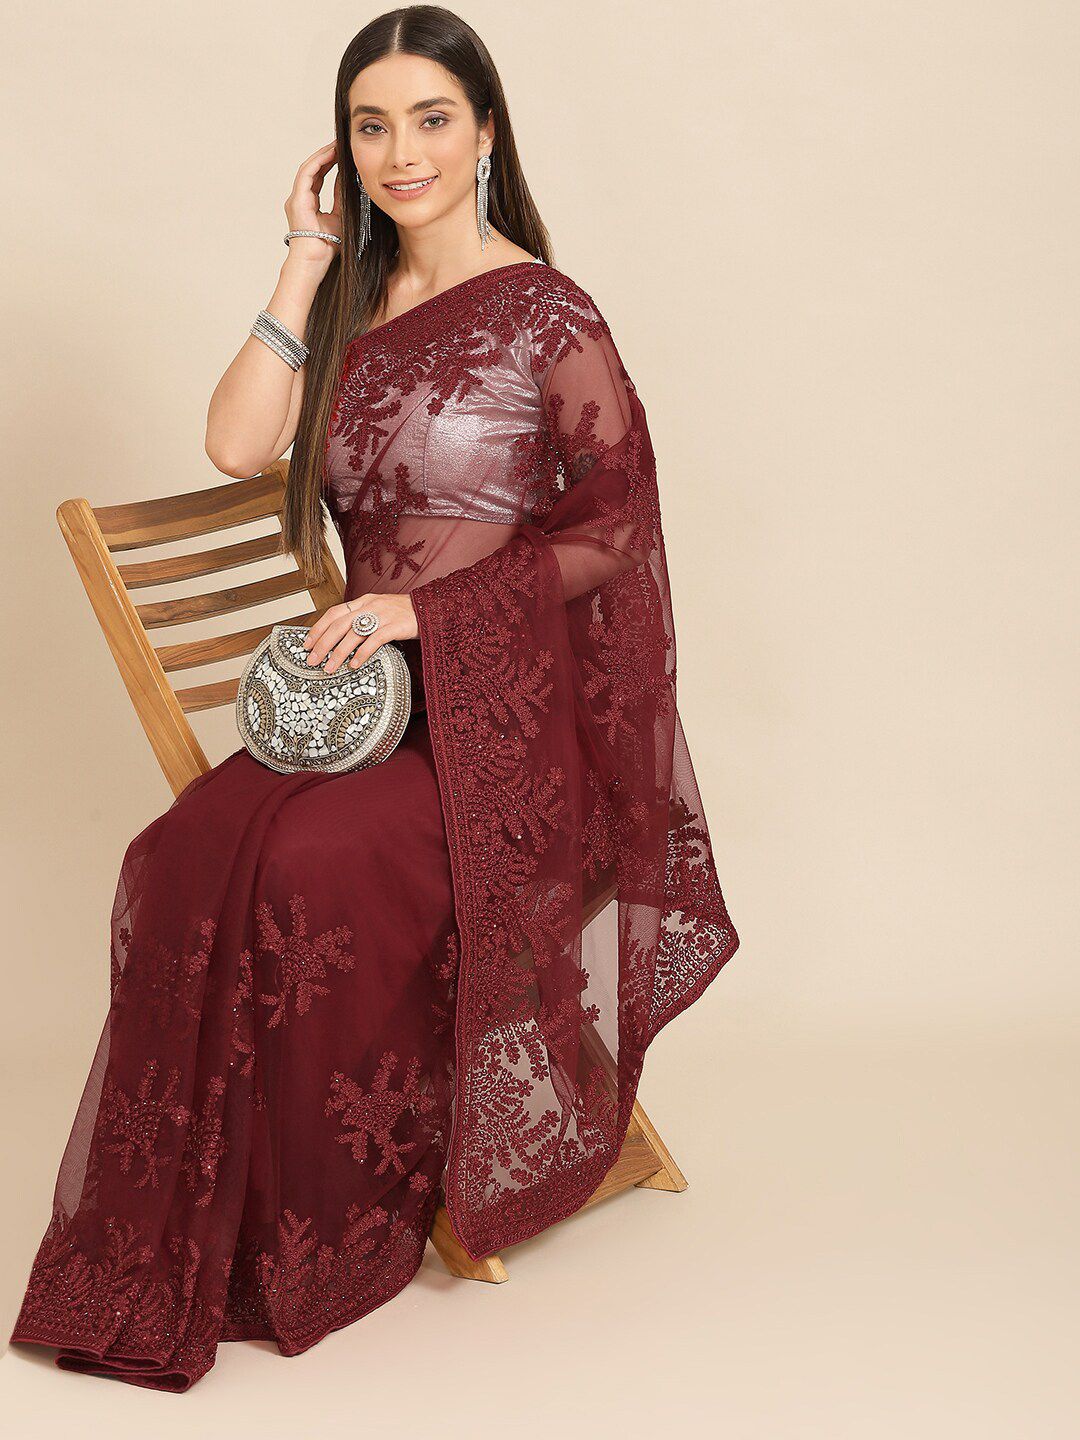 all about you Maroon Floral Beads and Stones Net Mangalagiri Saree Price in India